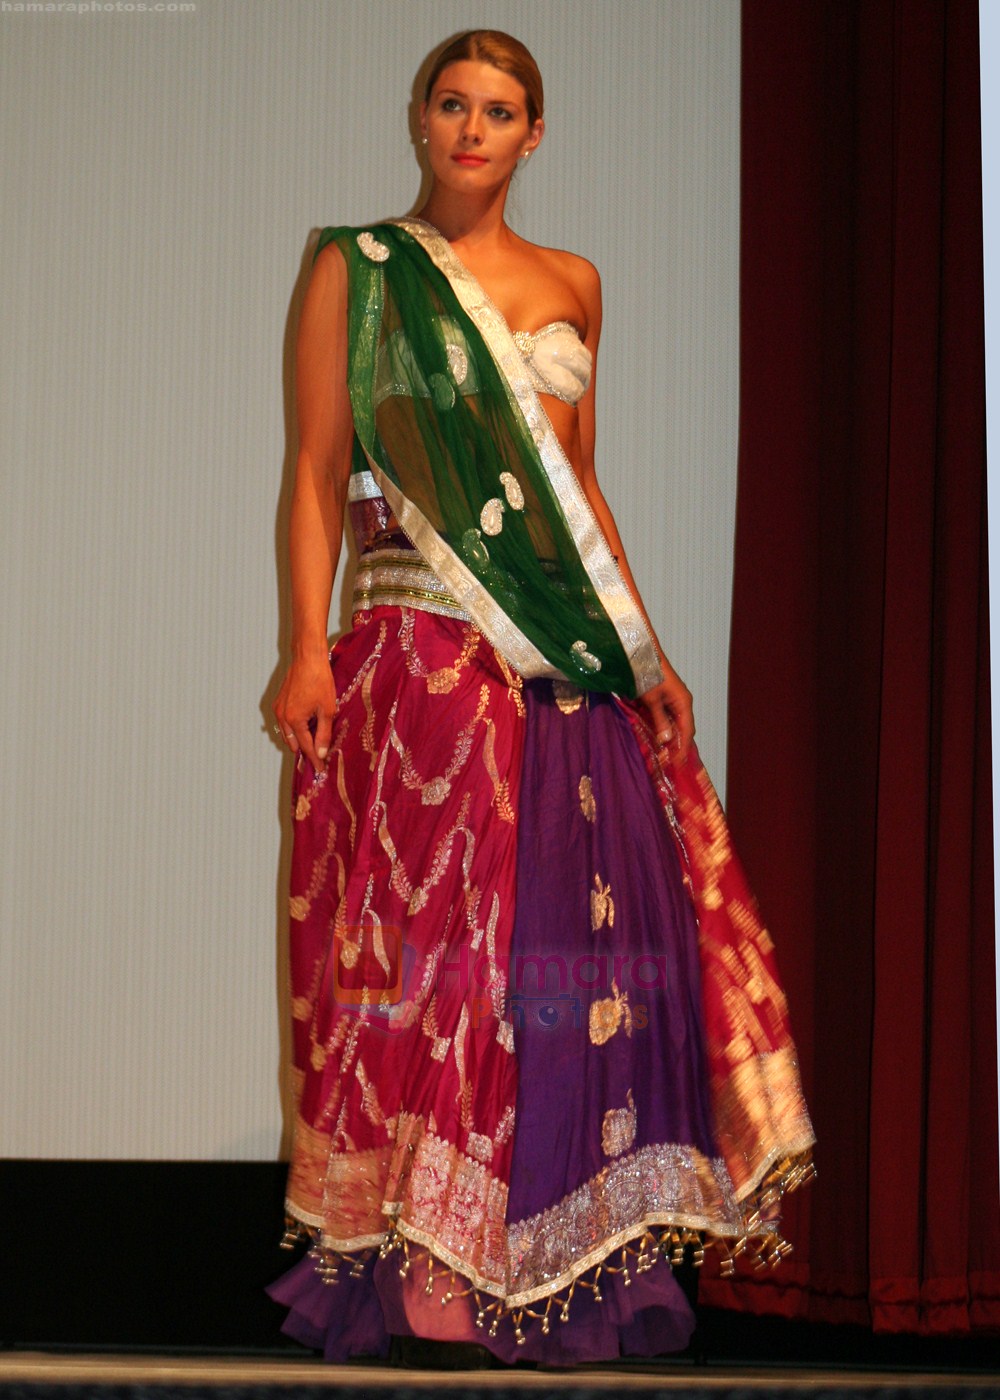 Model at Indian Students (IIFTians) Designs-Costumes at the UK Fashion Extravaganza_2011 held by Bradford College UK on 27th June 2011